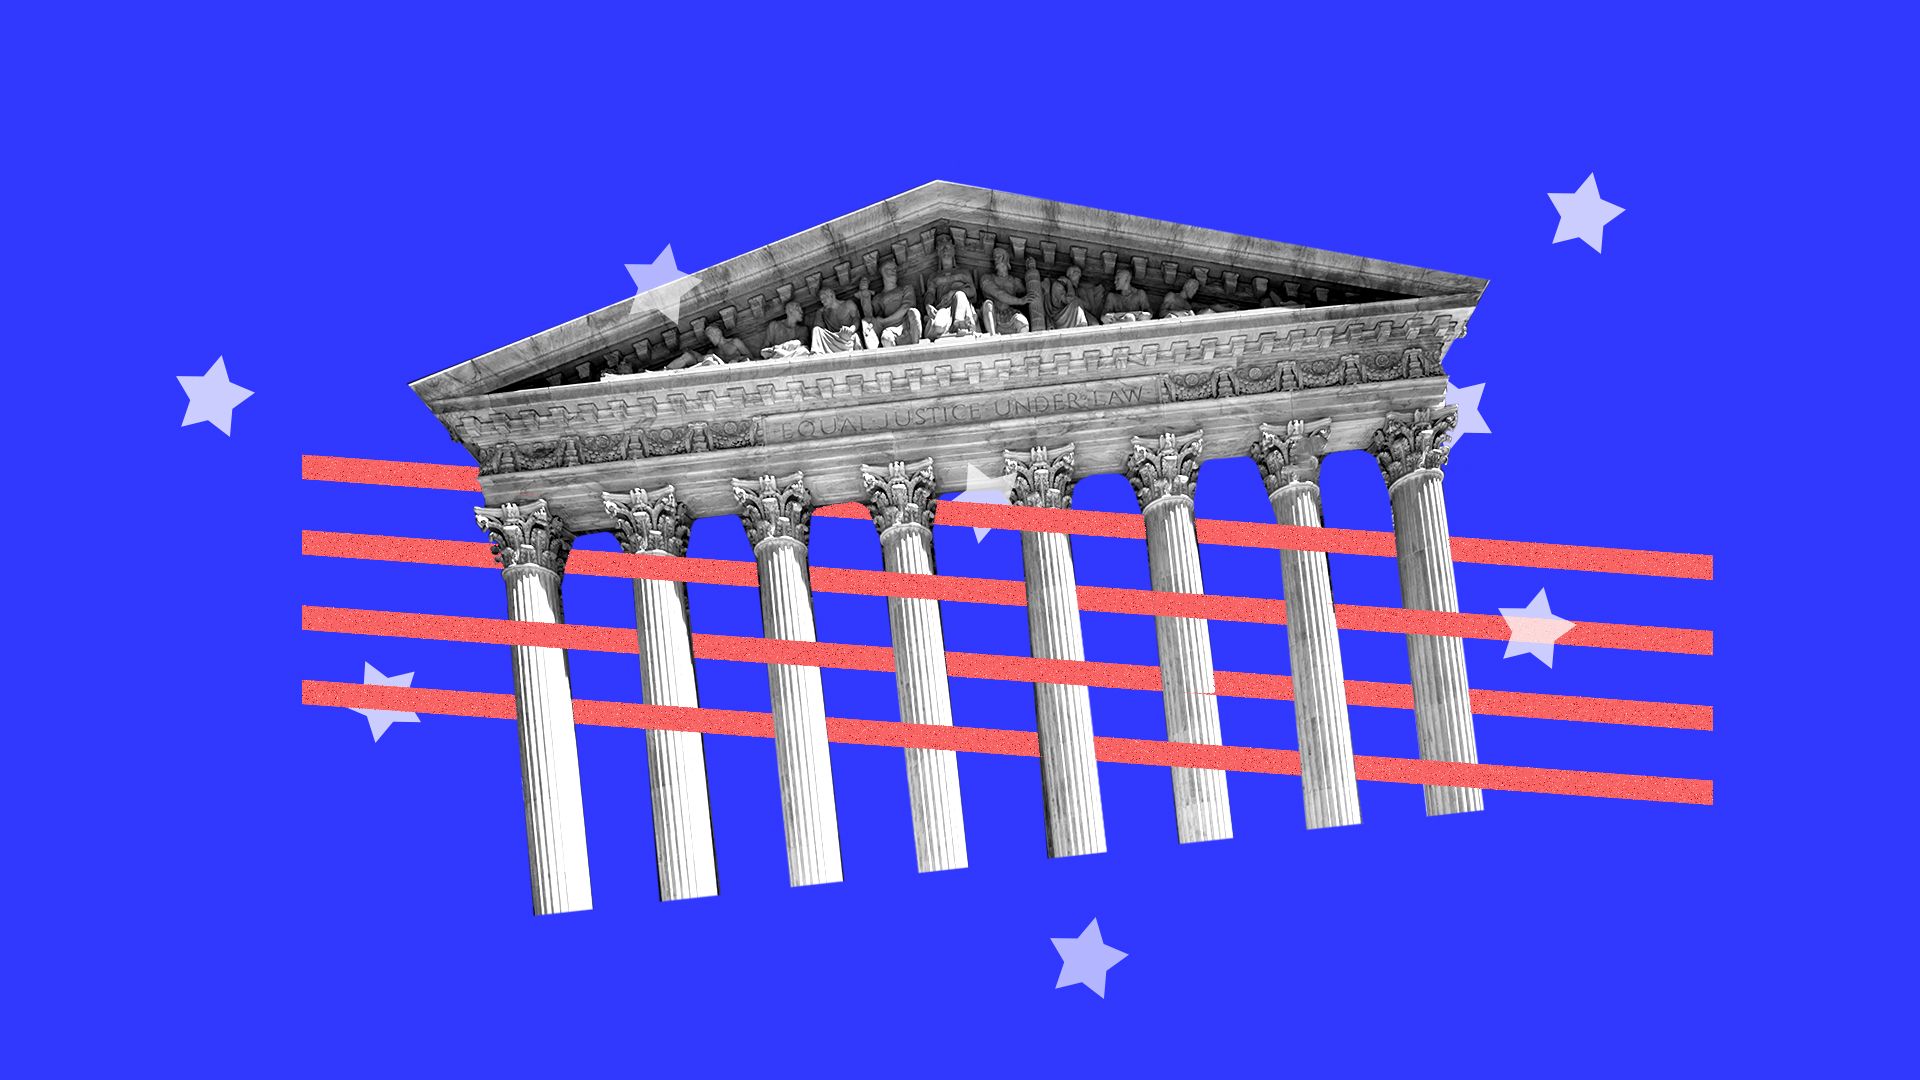 Illustration of the supreme court intertwined with elements from an American flag 